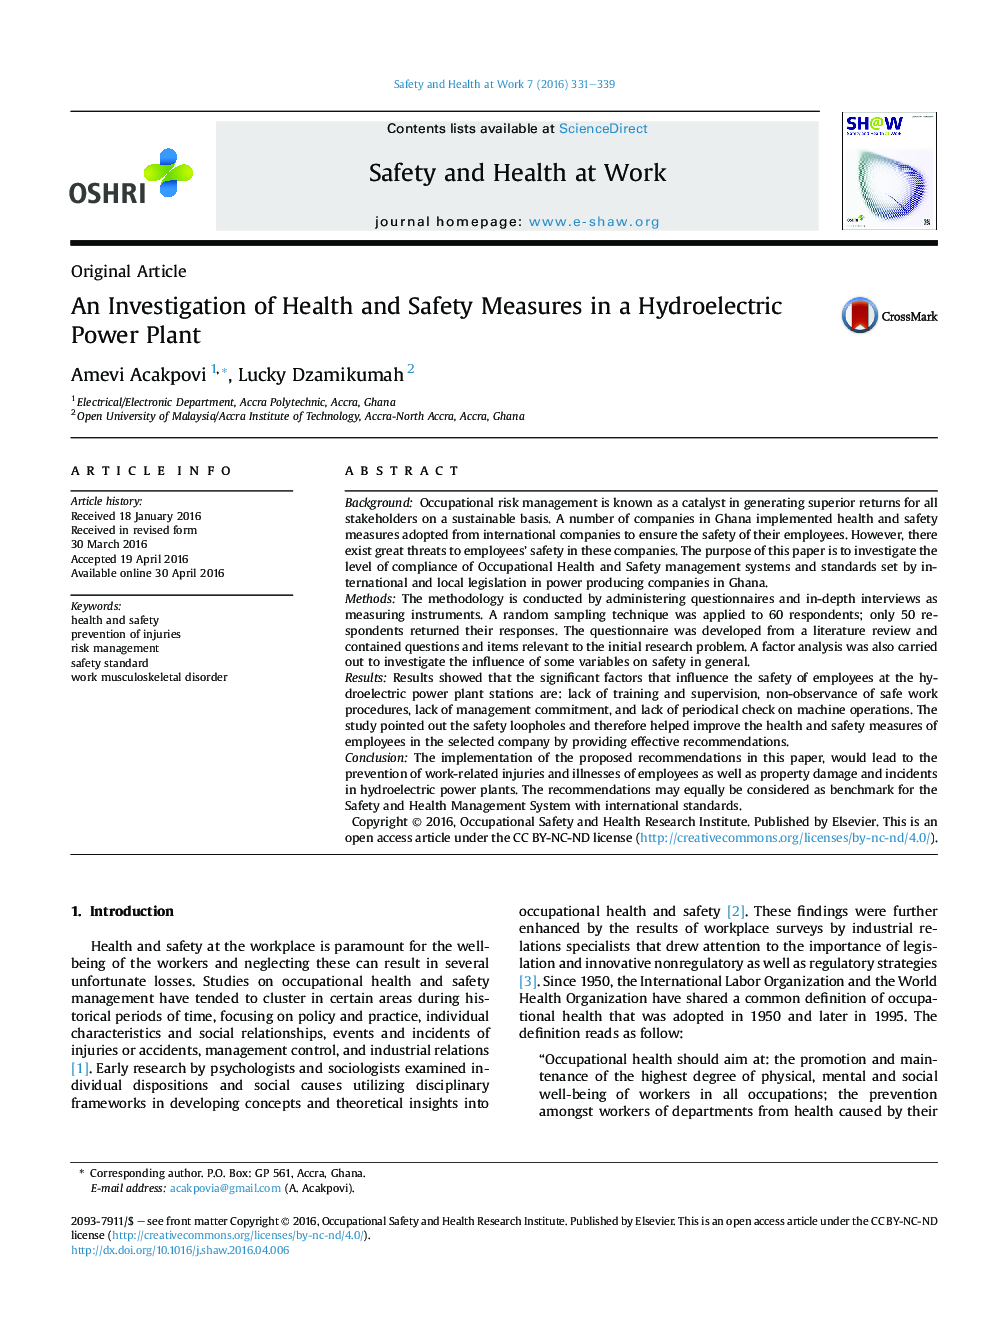 An Investigation of Health and Safety Measures in a Hydroelectric Power Plant